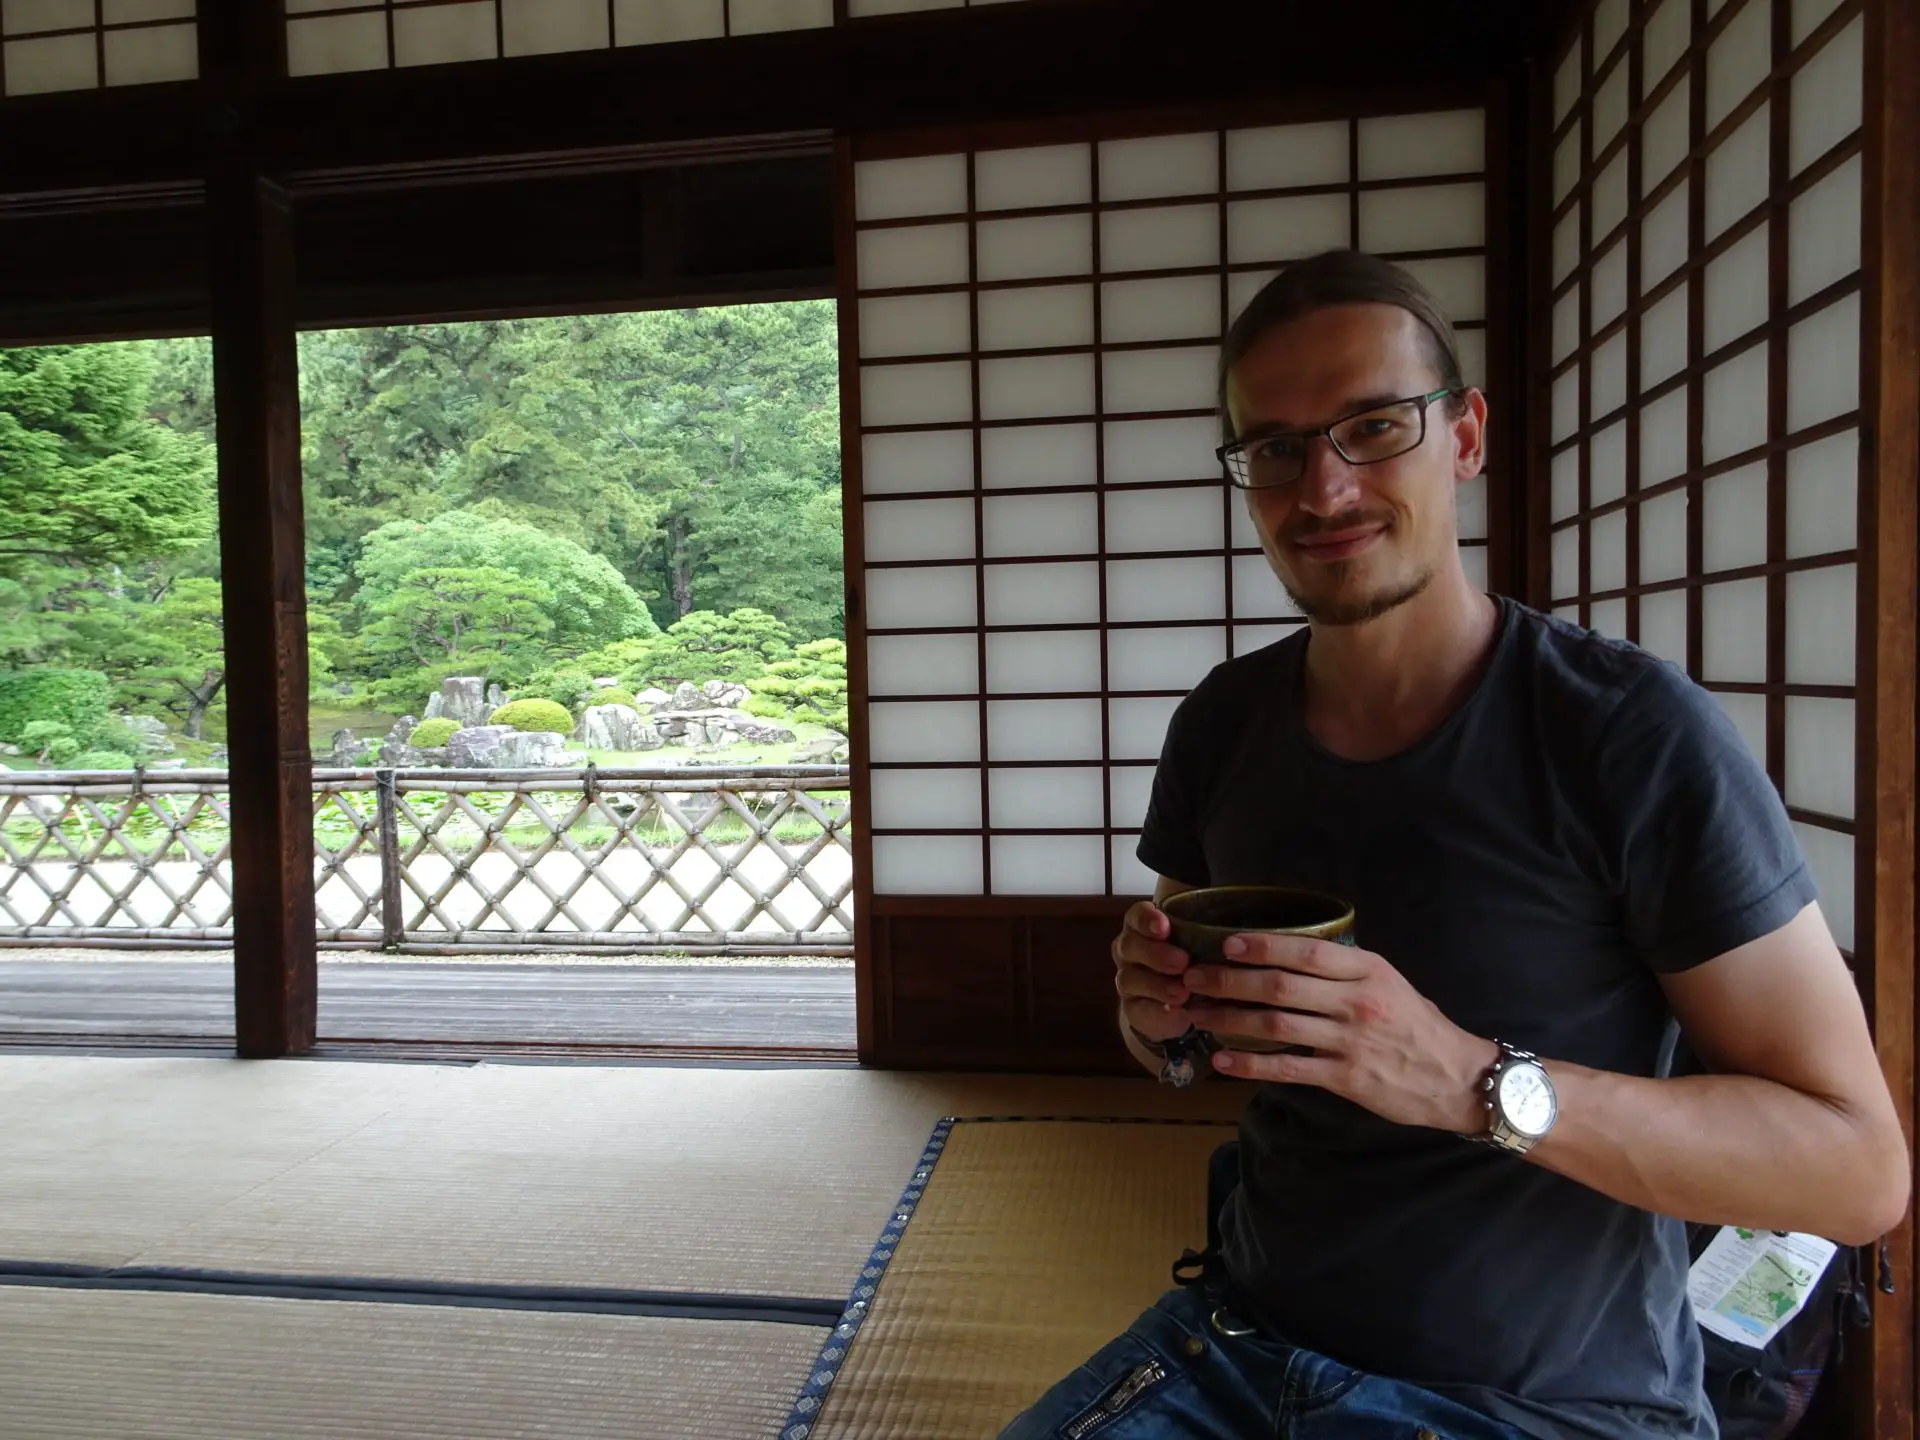 A man holding a cup of tea kneeling on some tatami mats